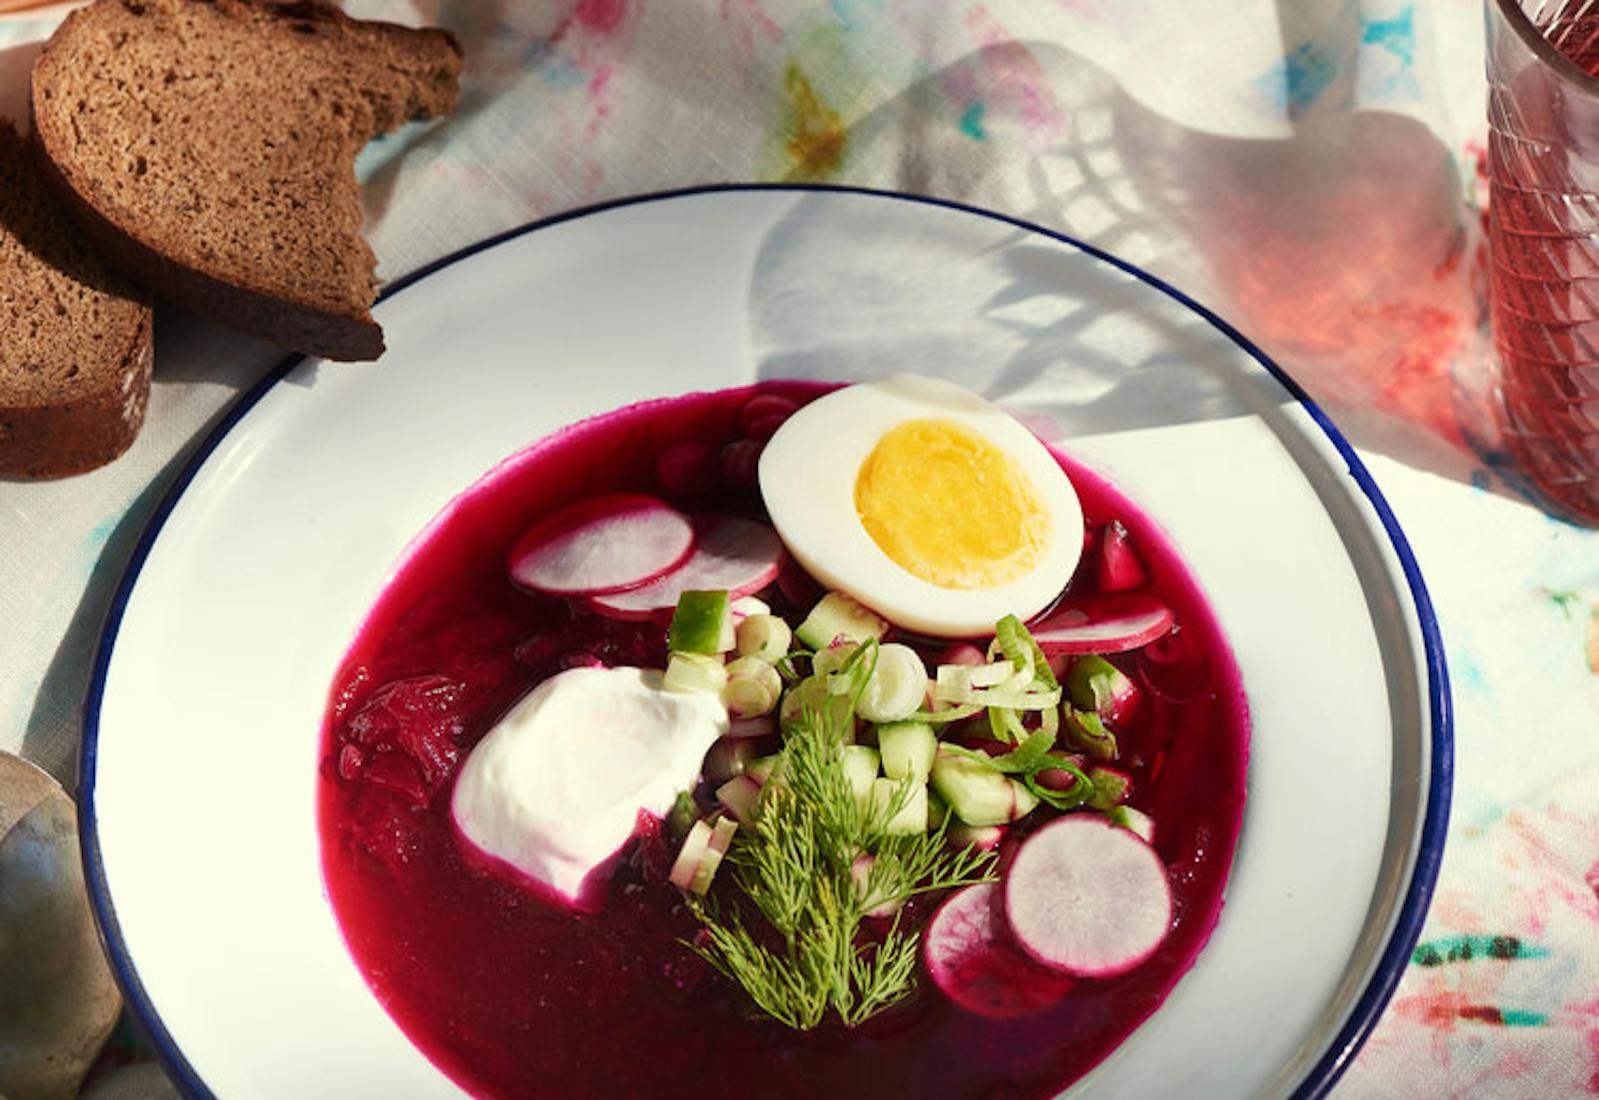 Bowl of svekolnik garnished with dill, radishes, cucumbers, scallions, sour cream and hard boiled egg alongside sliced brown bread atop tie-dyed tablecloth. 